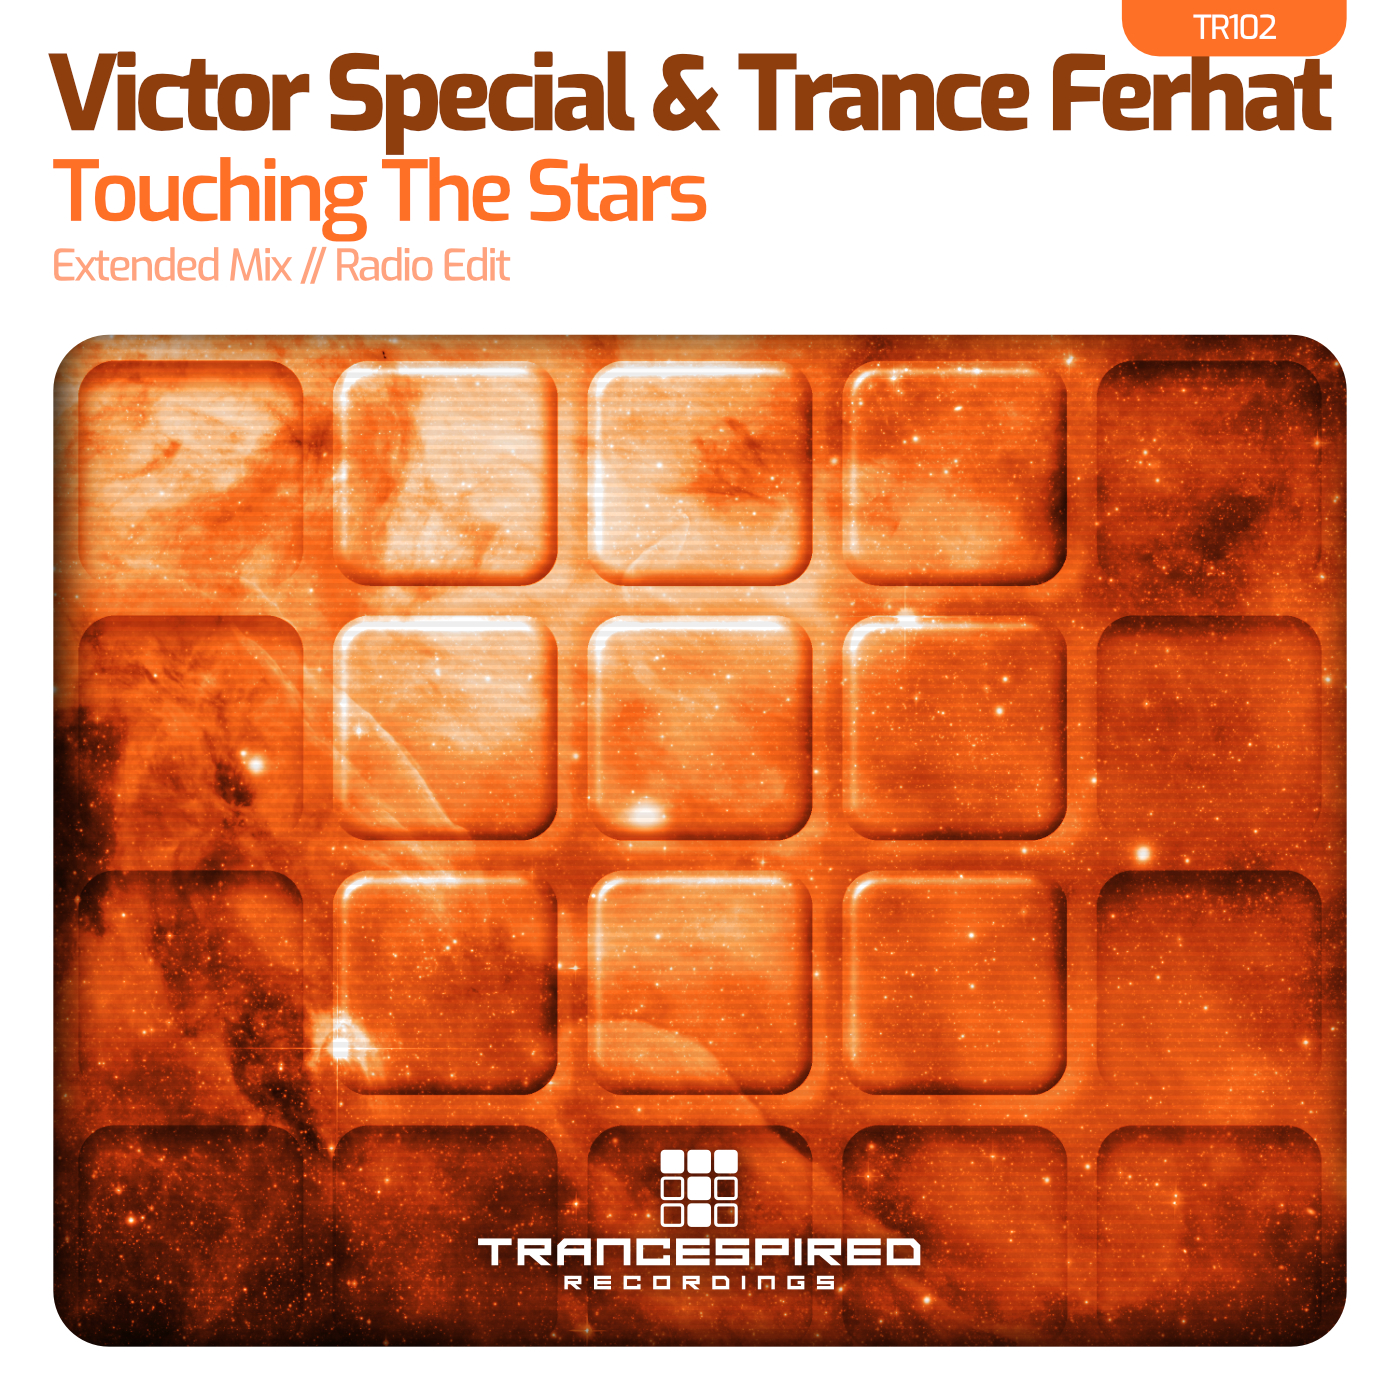 Victor Special and Trance Ferhat presents Touching The Stars on Trancespired Recordings